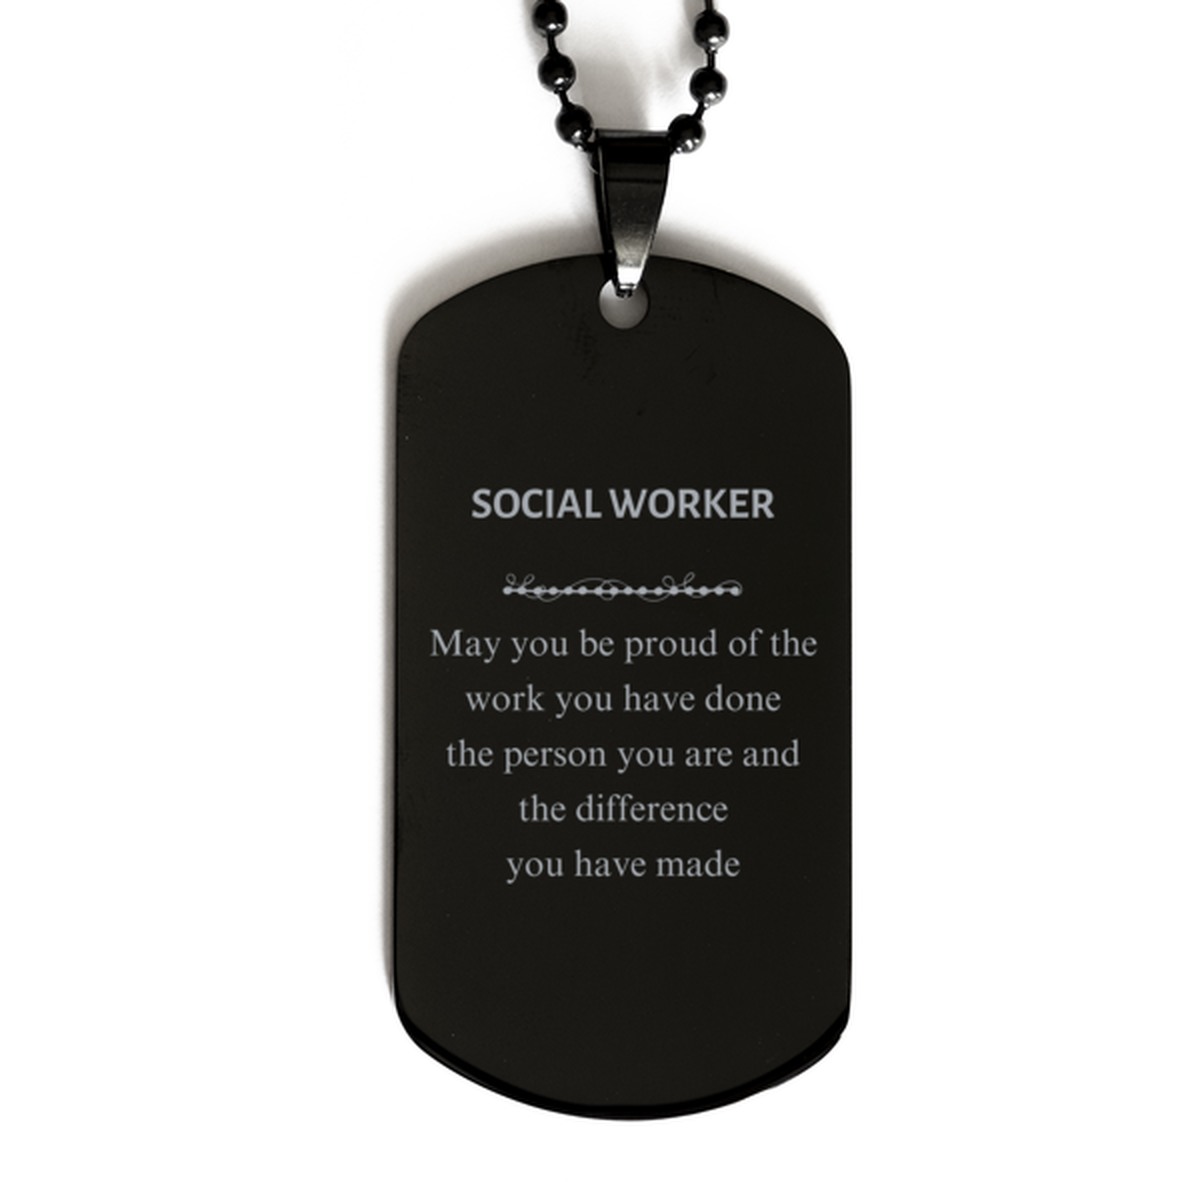 Social Worker May you be proud of the work you have done, Retirement Social Worker Black Dog Tag for Colleague Appreciation Gifts Amazing for Social Worker